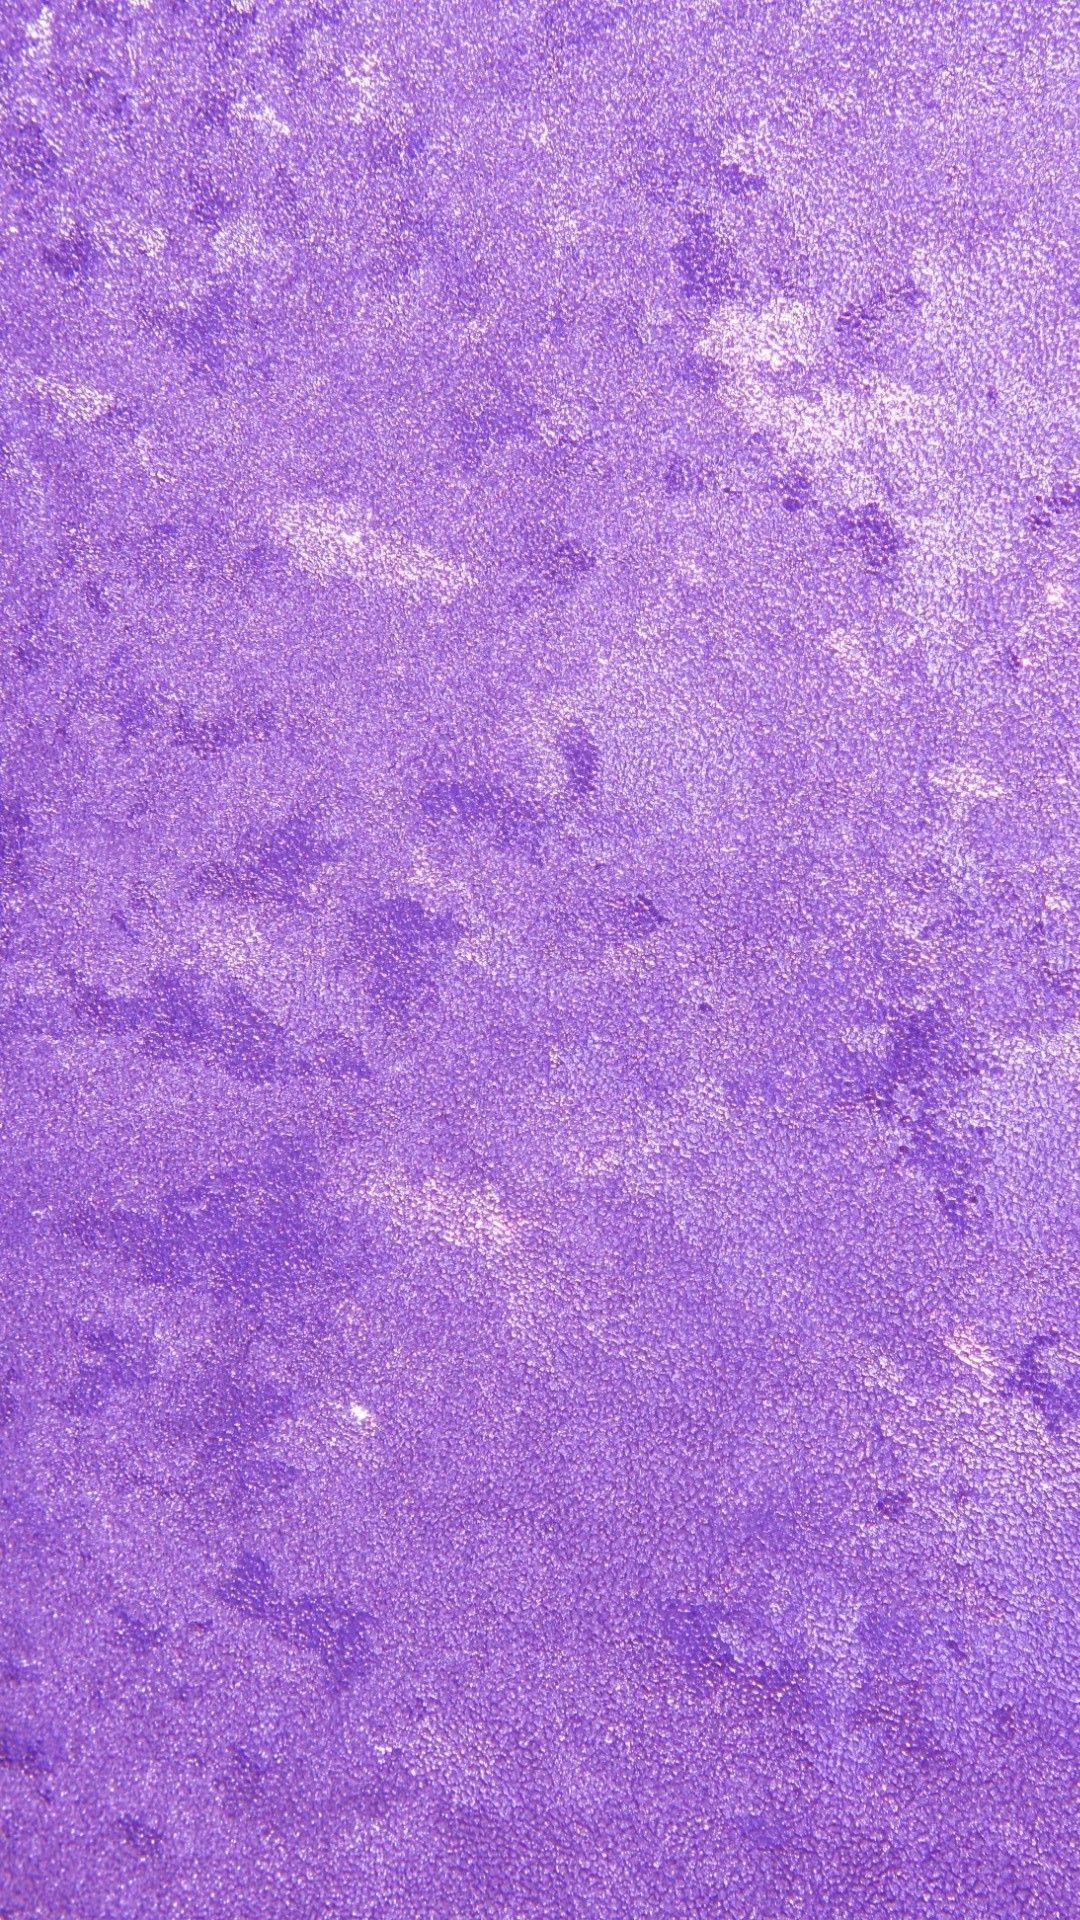 Close up Purple Texture iPhone Wallpaper iPhone Wallpaper. Purple wallpaper, Purple background, Purple aesthetic